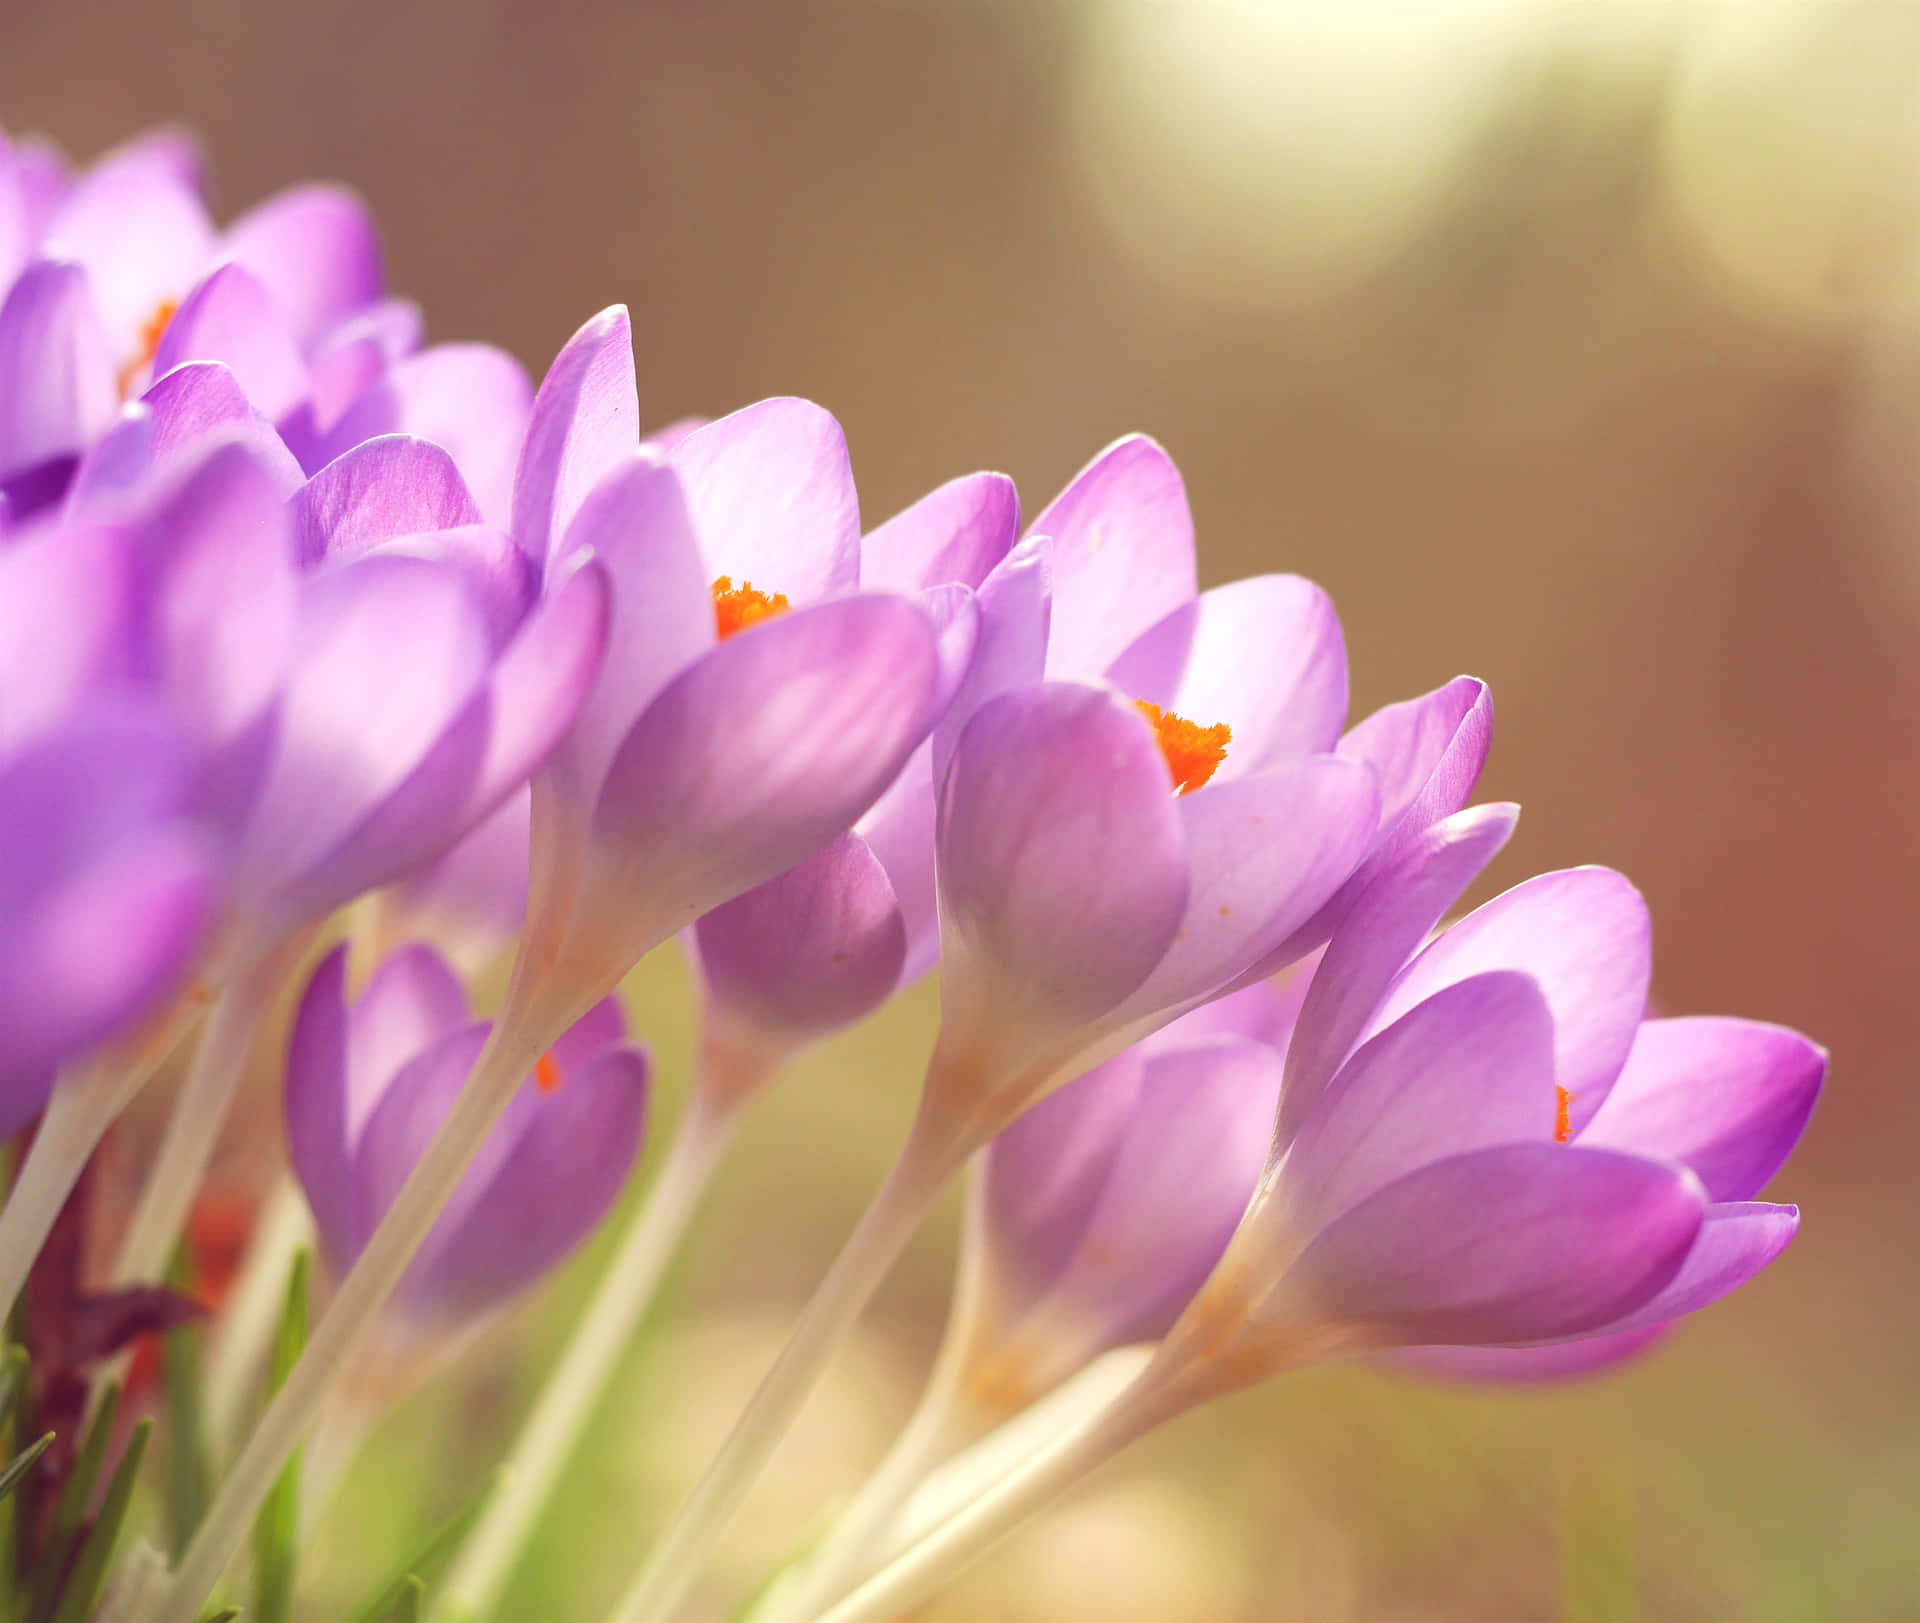 Beautiful spring flowers forming a colorful natural background